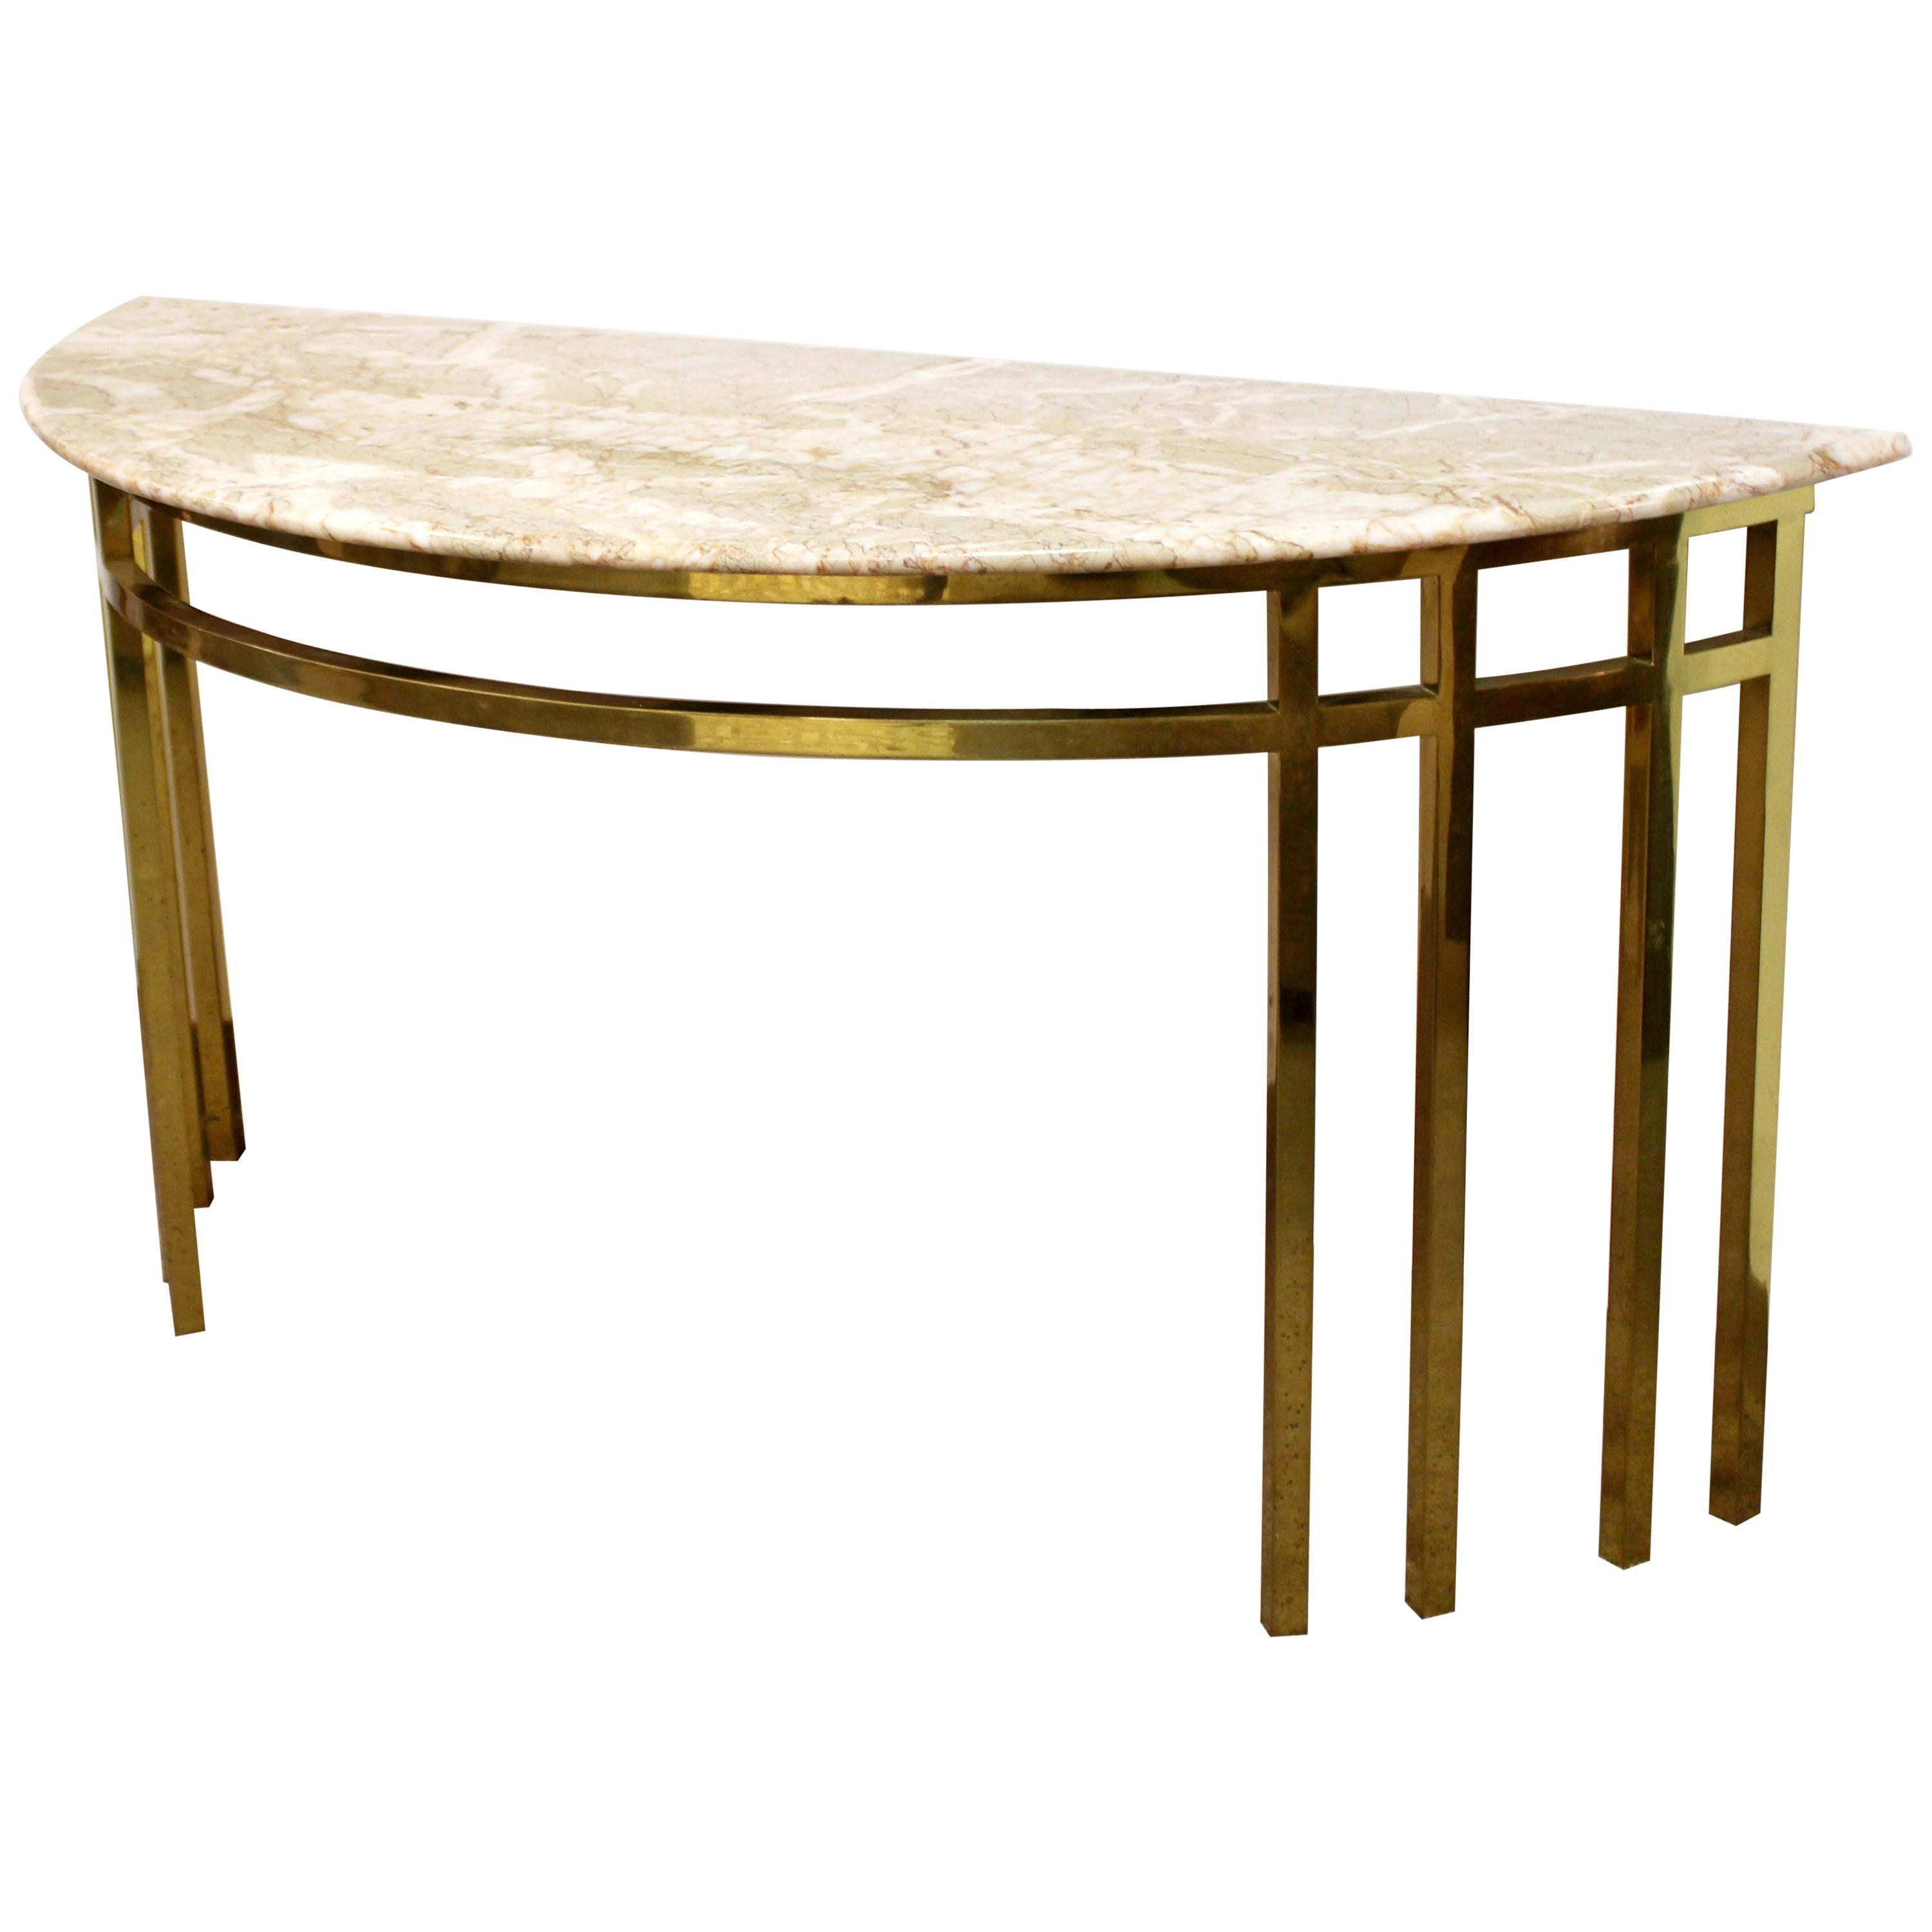 Mid-Century Modern Marble on Brass Demilune Console Table Parzinger Style, 1960s